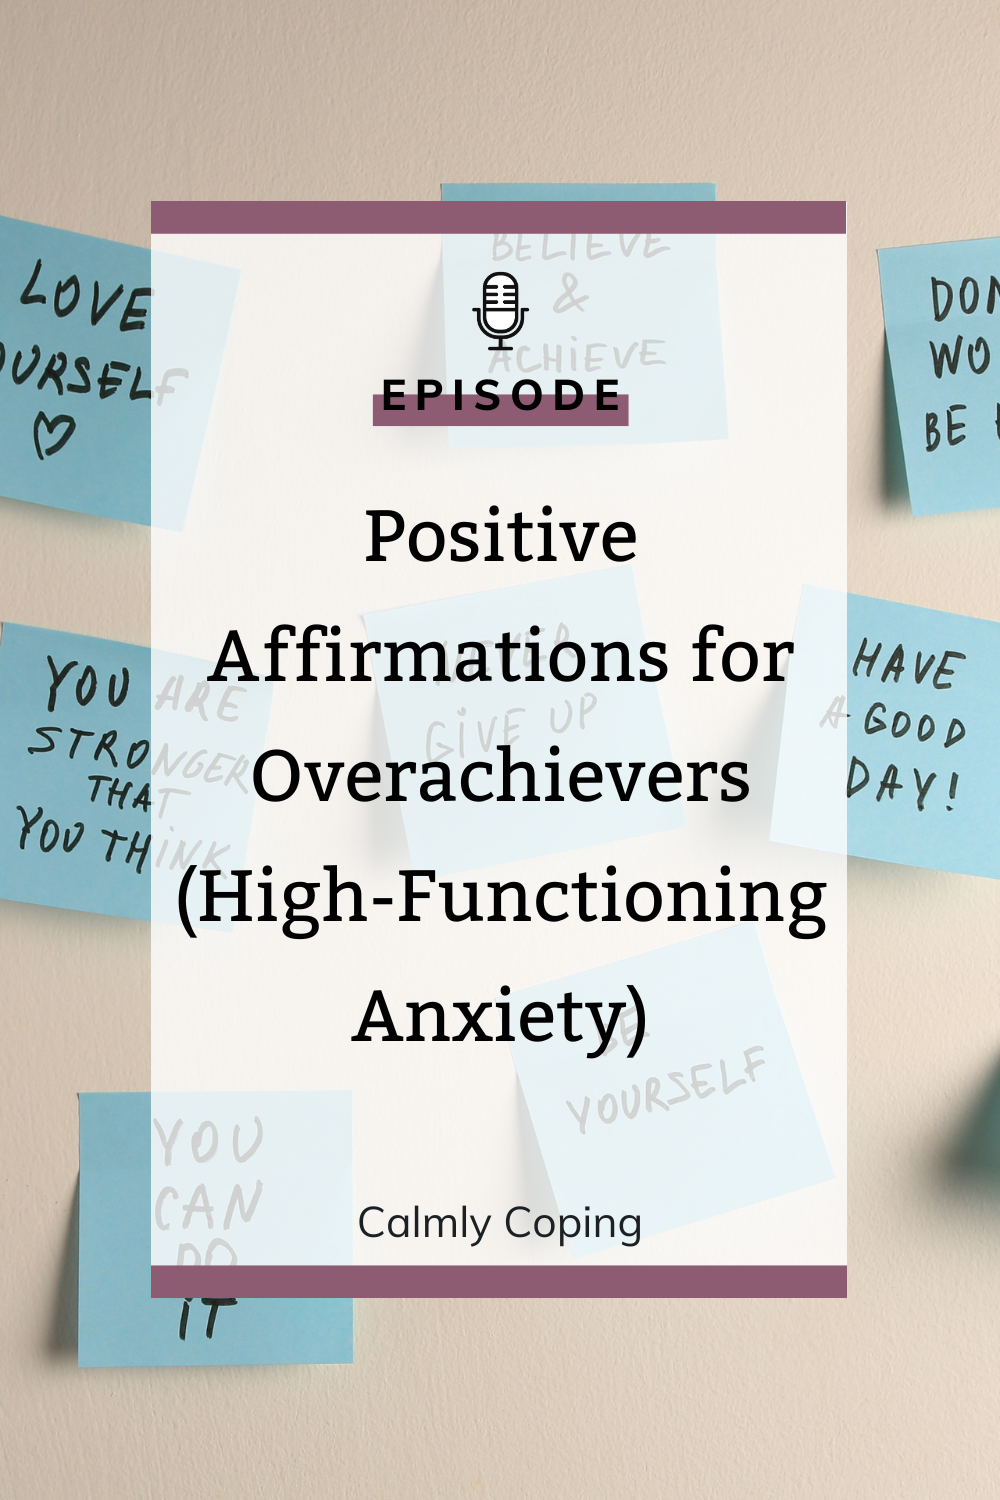 Positive Affirmations for Overachievers (High-Functioning Anxiety)